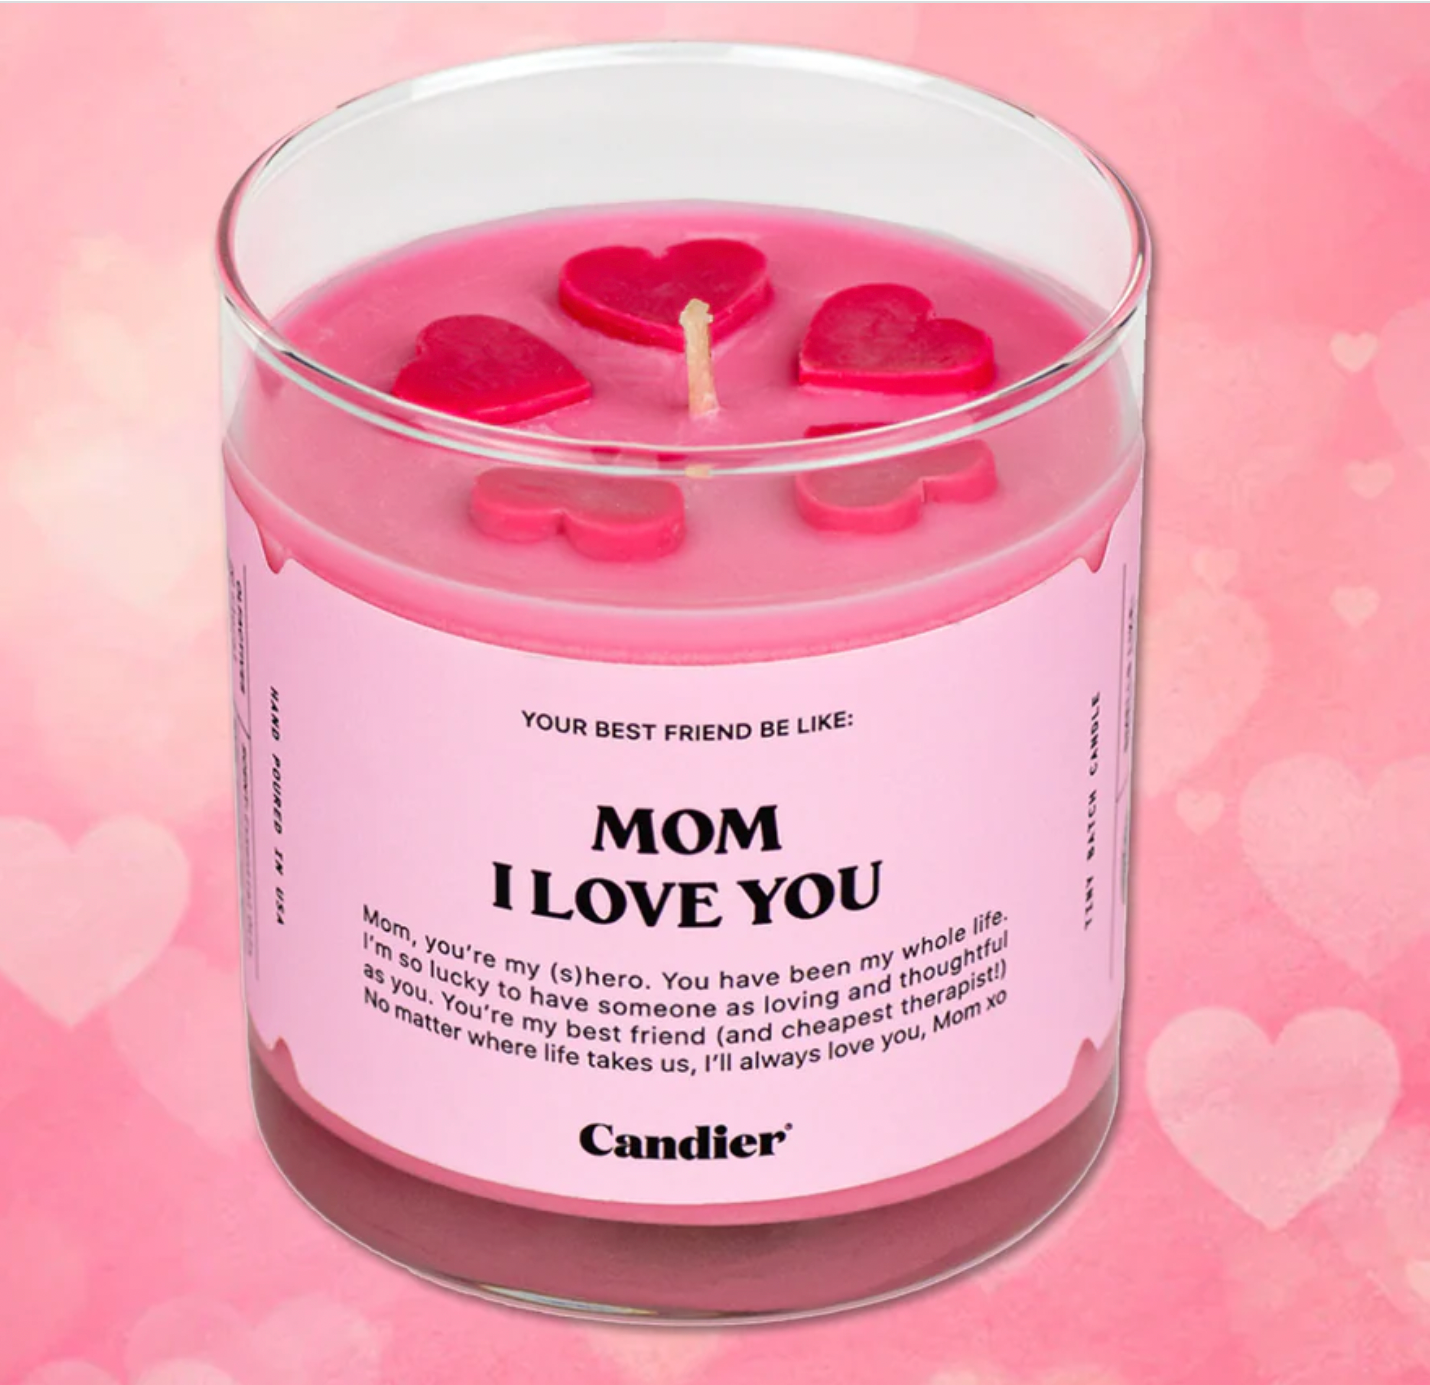 Candier SOY CANDLE "Mom I love you"